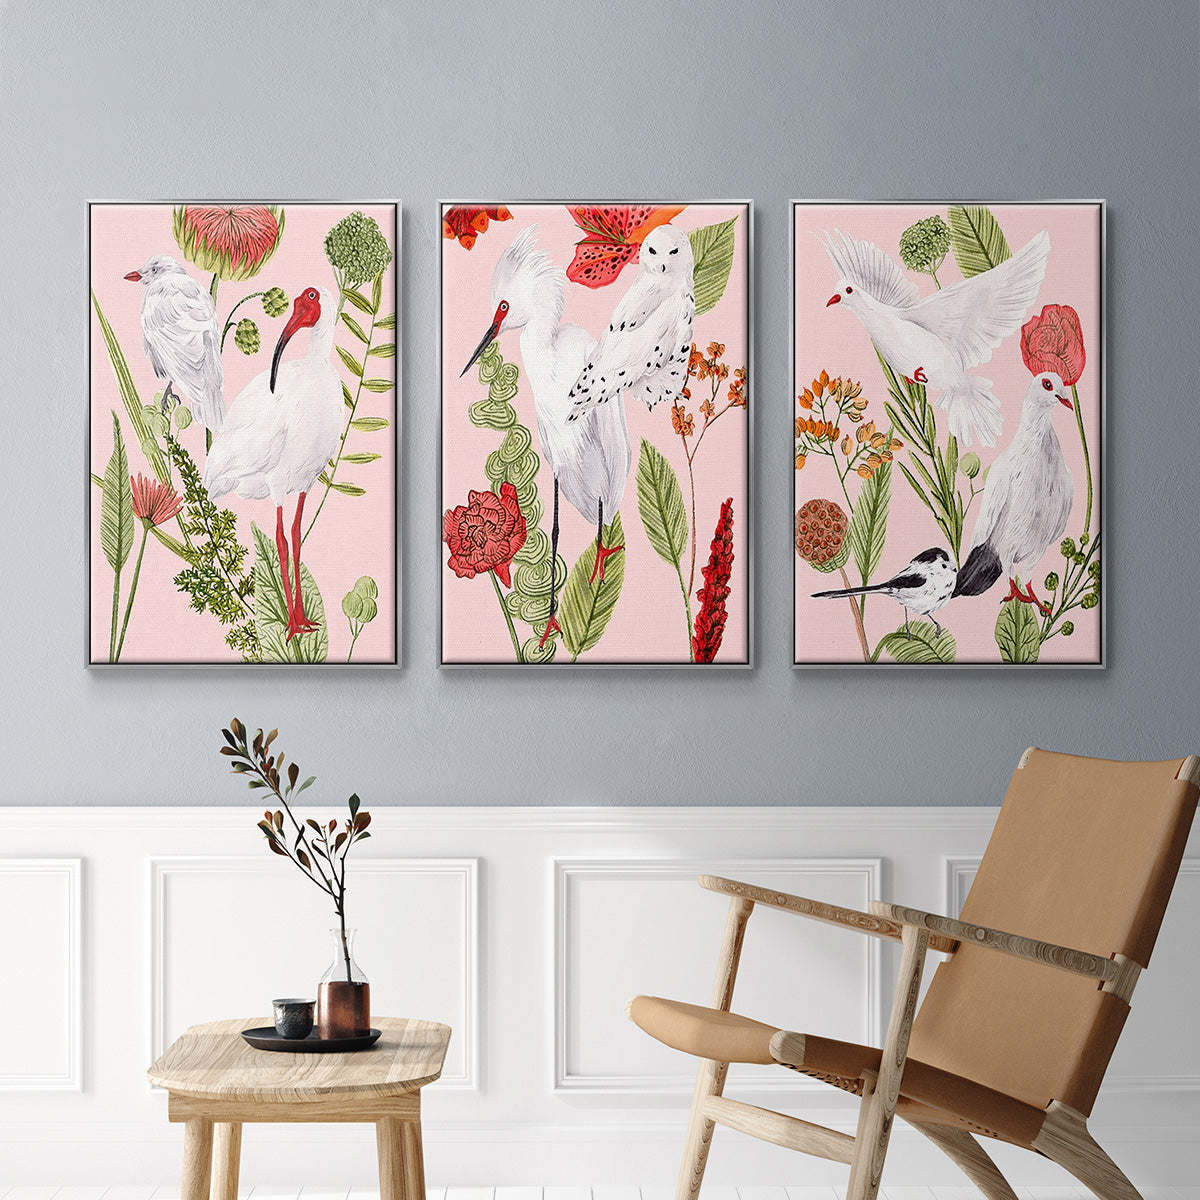 Birds in Motion I - Framed Premium Gallery Wrapped Canvas L Frame 3 Piece Set - Ready to Hang